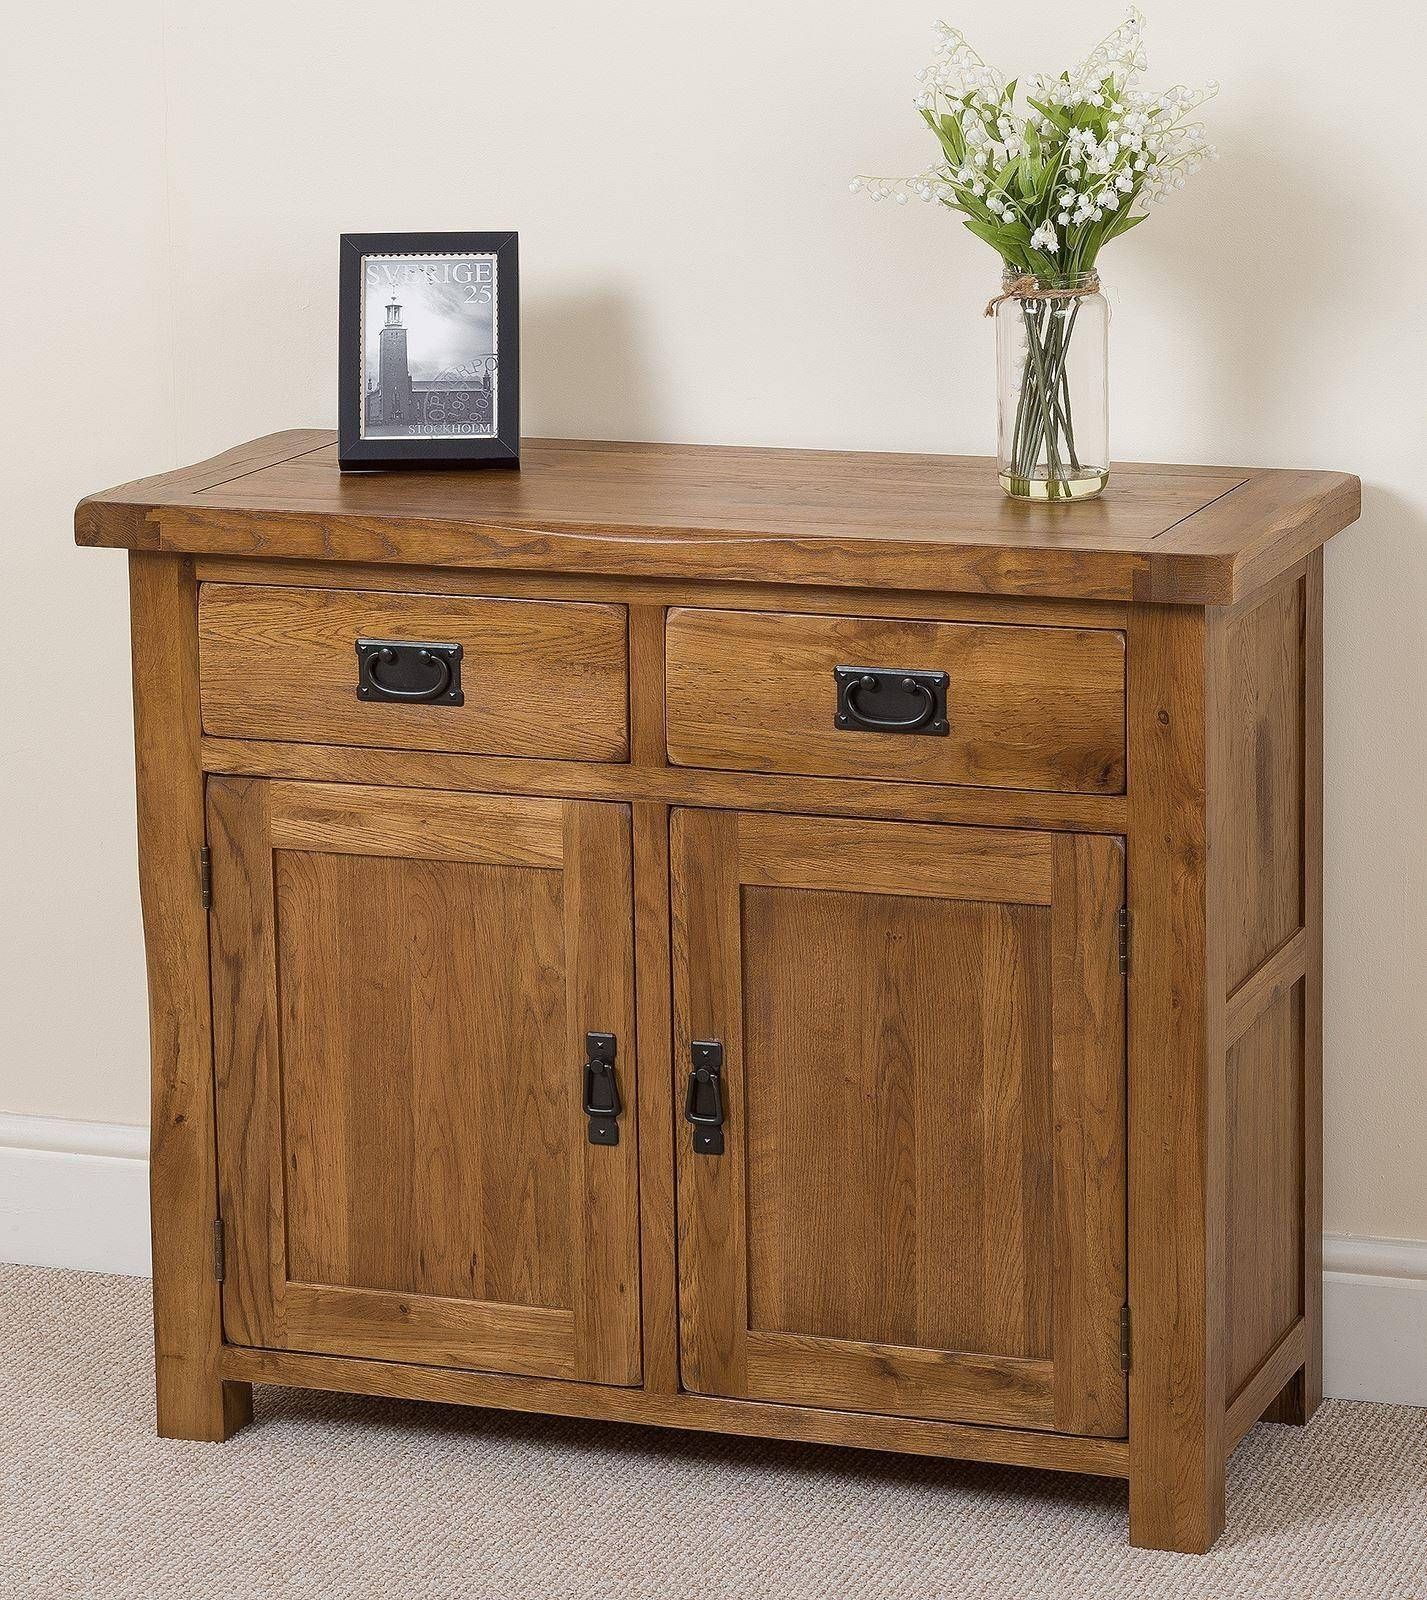 Cotswold Rustic Small Oak Sideboard | Free Uk Delivery Inside Rustic Sideboard Furniture (Photo 1 of 15)